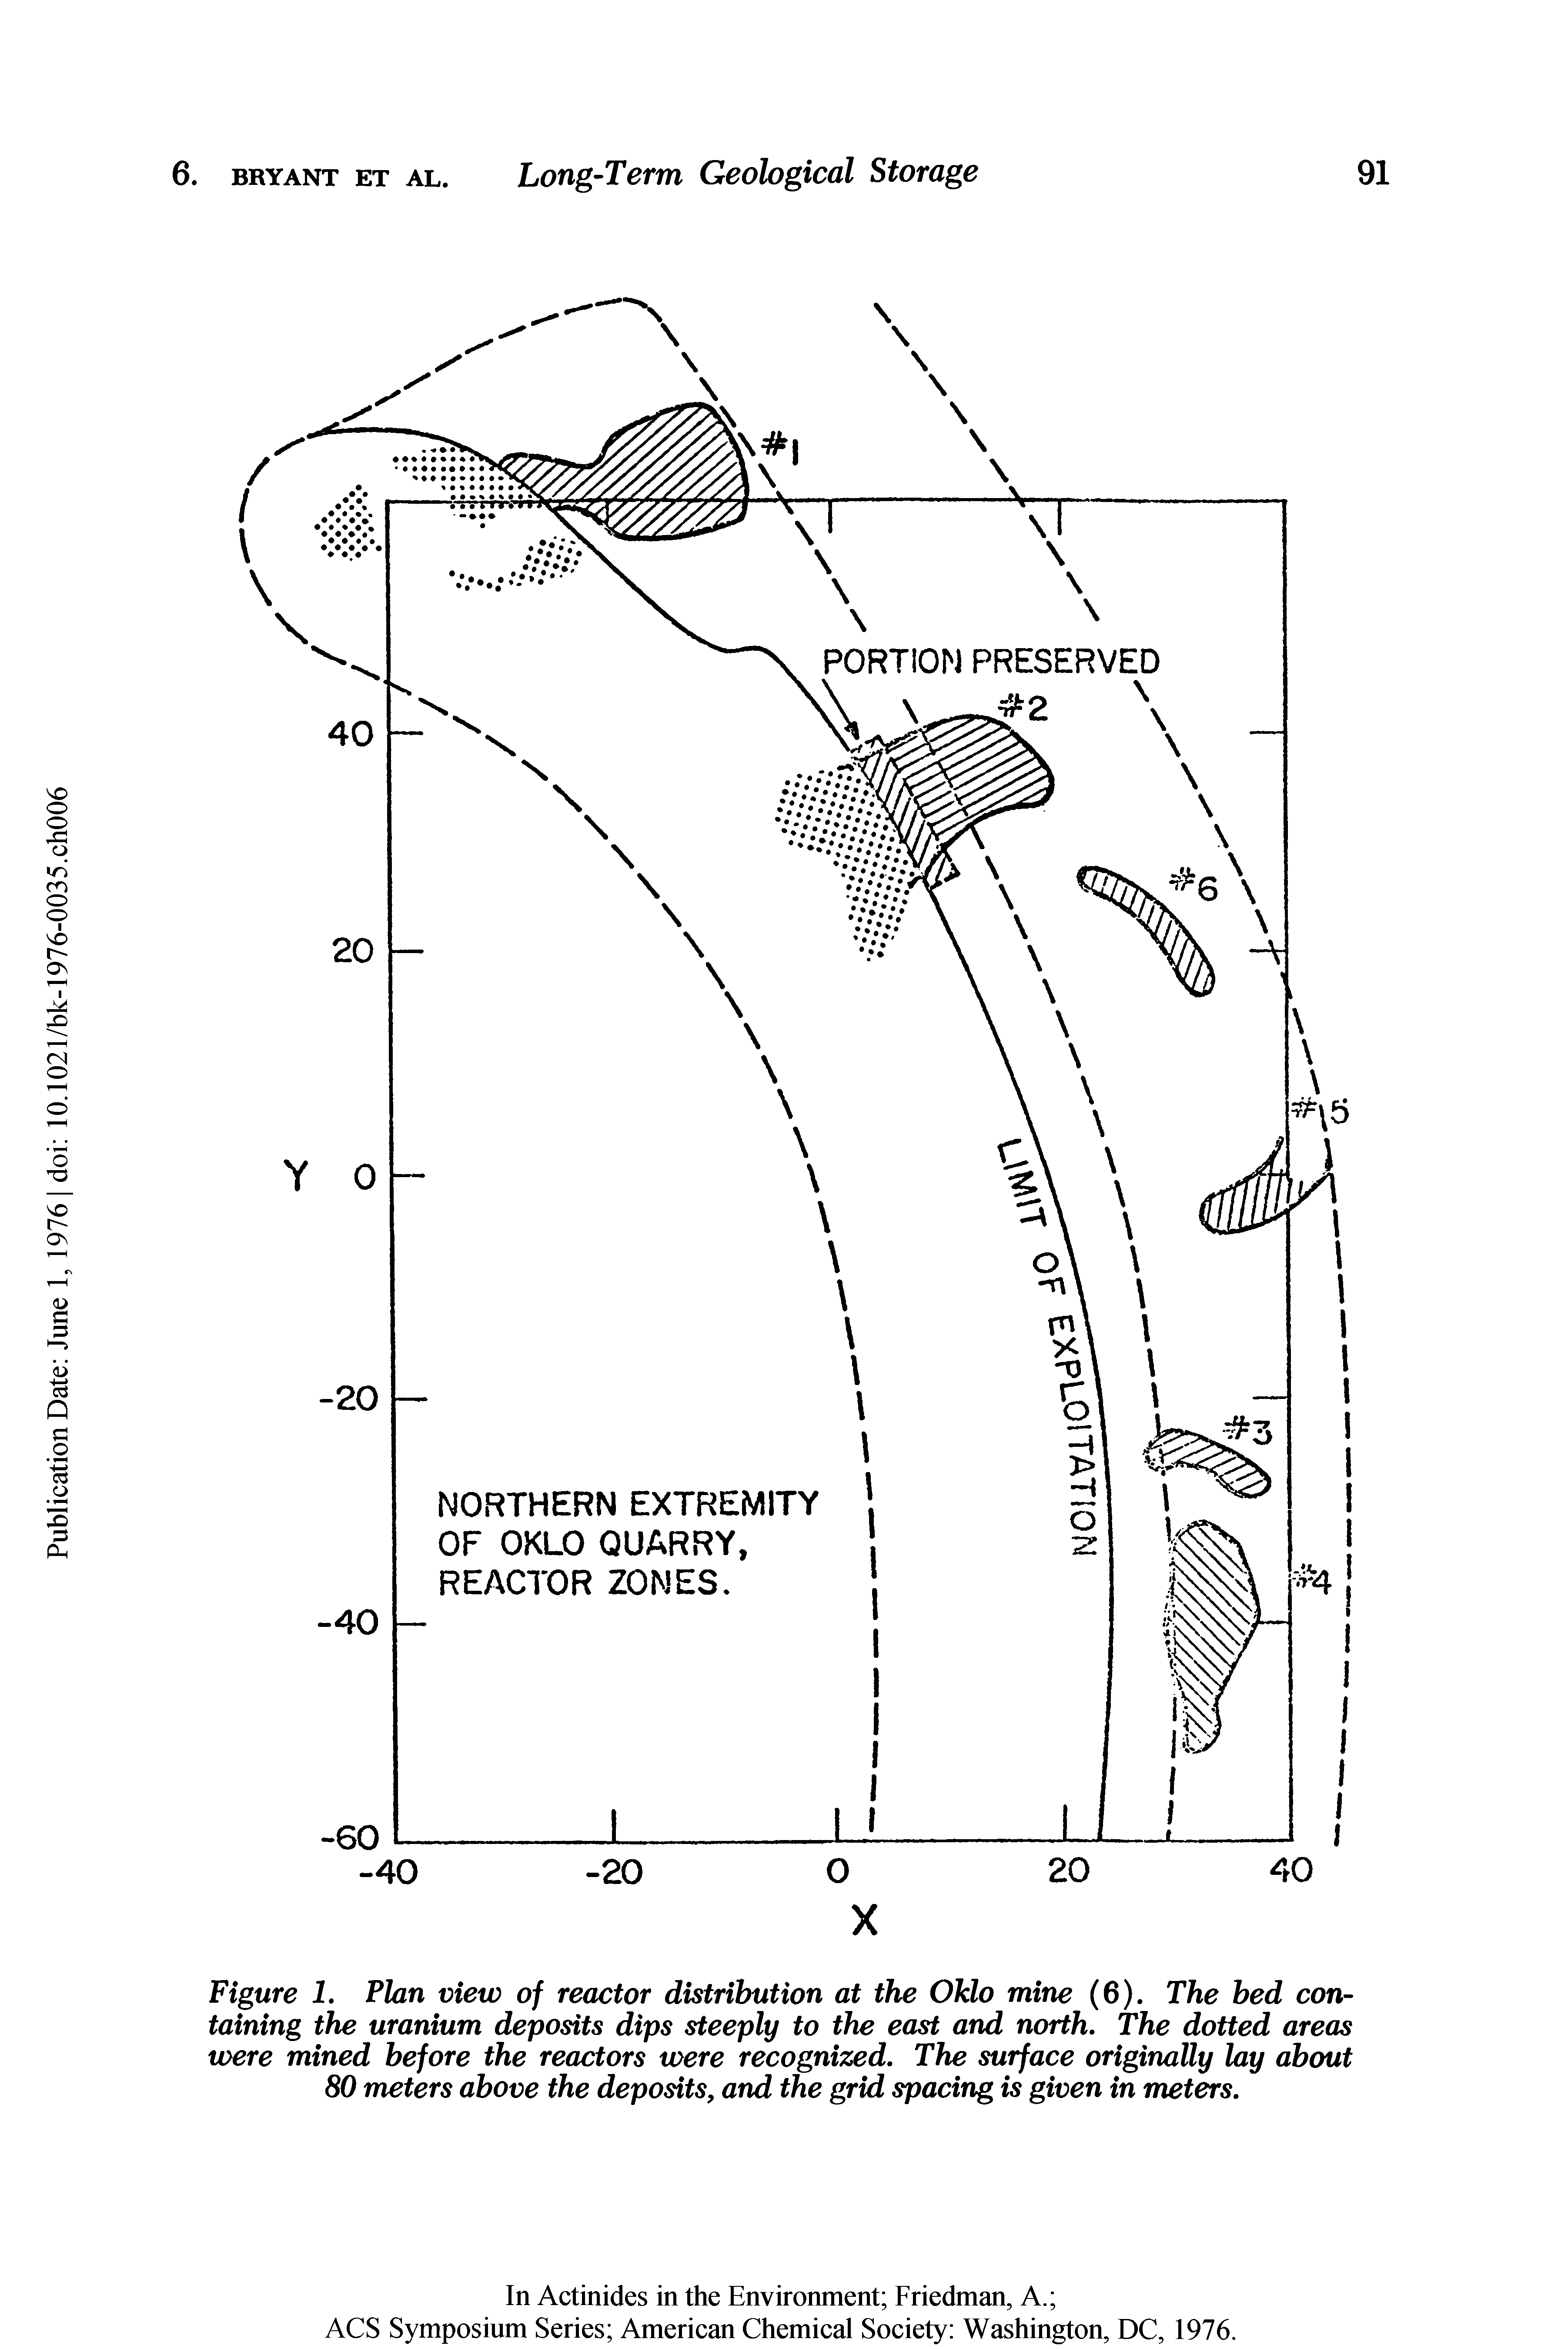 Figure 1. Plan view of reactor distribution at the Ohio mine (6). The bed containing the uranium deposits dips steeply to the east and north. The dotted areas were mined before the reactors were recognized. The surface originally lay about 80 meters above the deposits, and the grid spacing is given in meters.